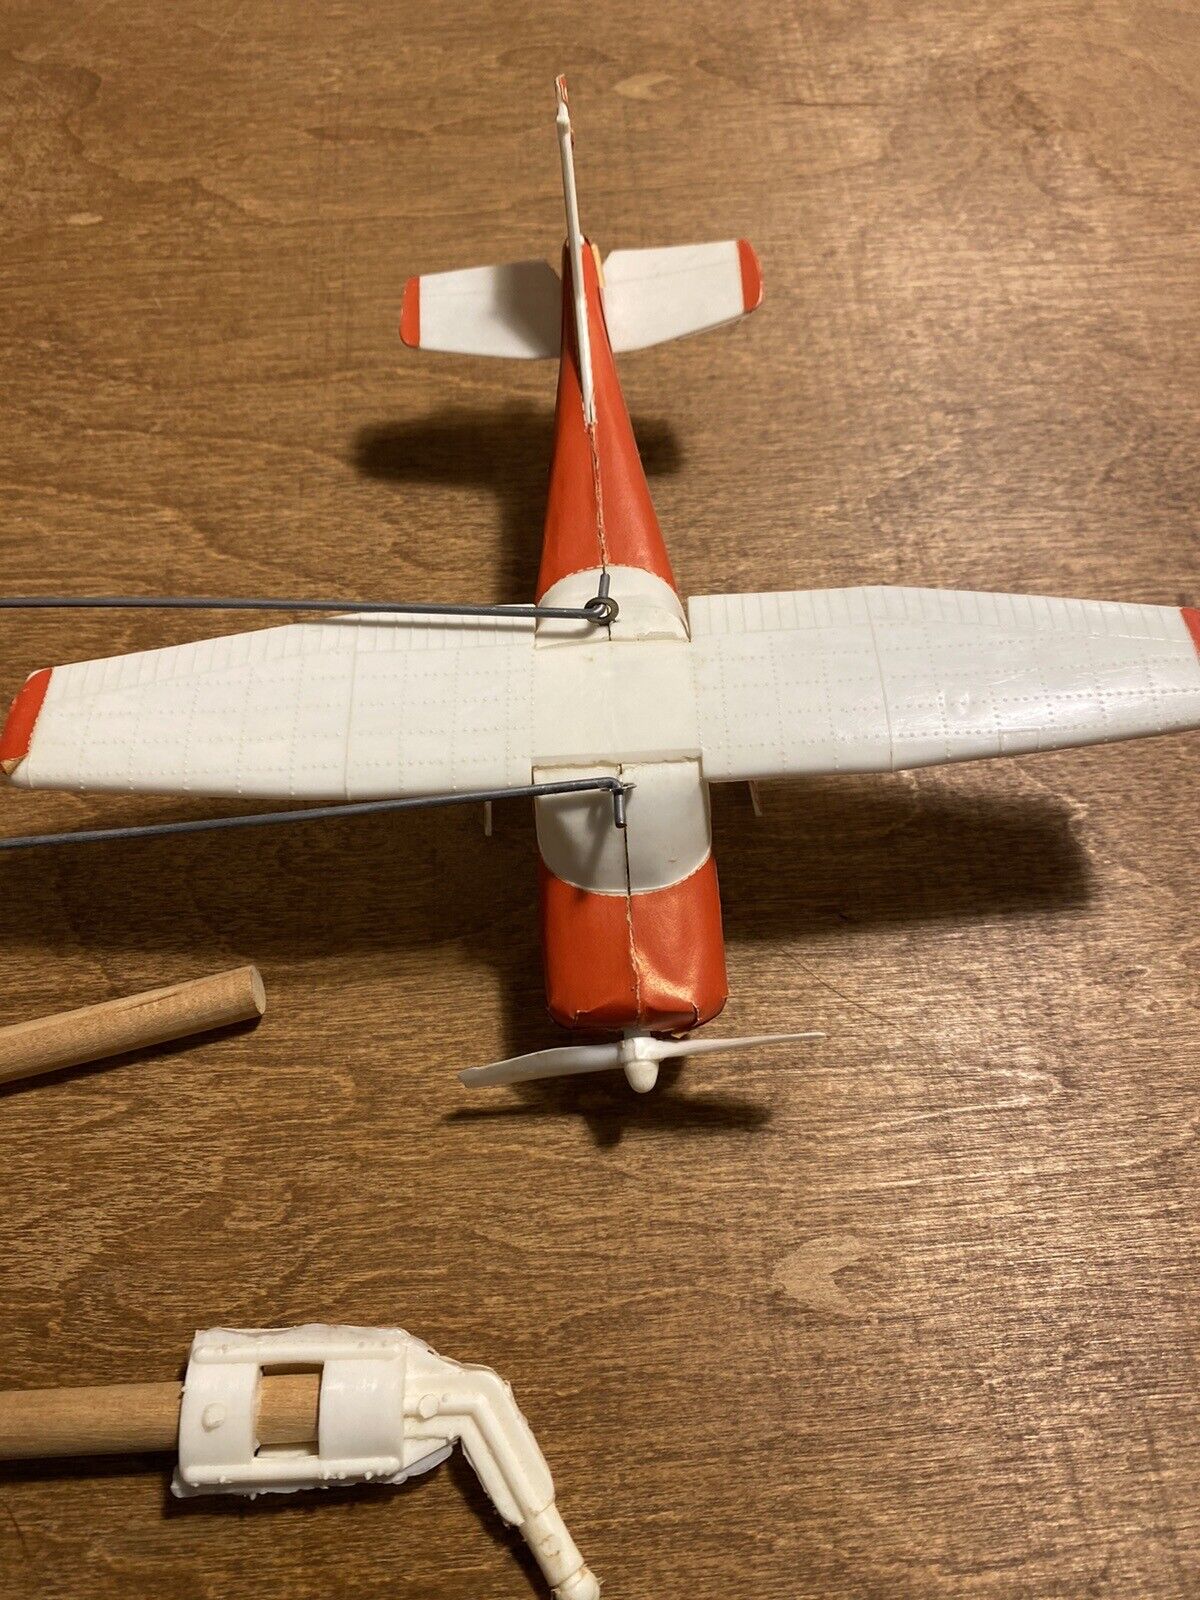 KELLOGG'S Corn Flakes Vintage ELECTRIC toy CESSNA 150 AIRPLANE Mail-in Premium